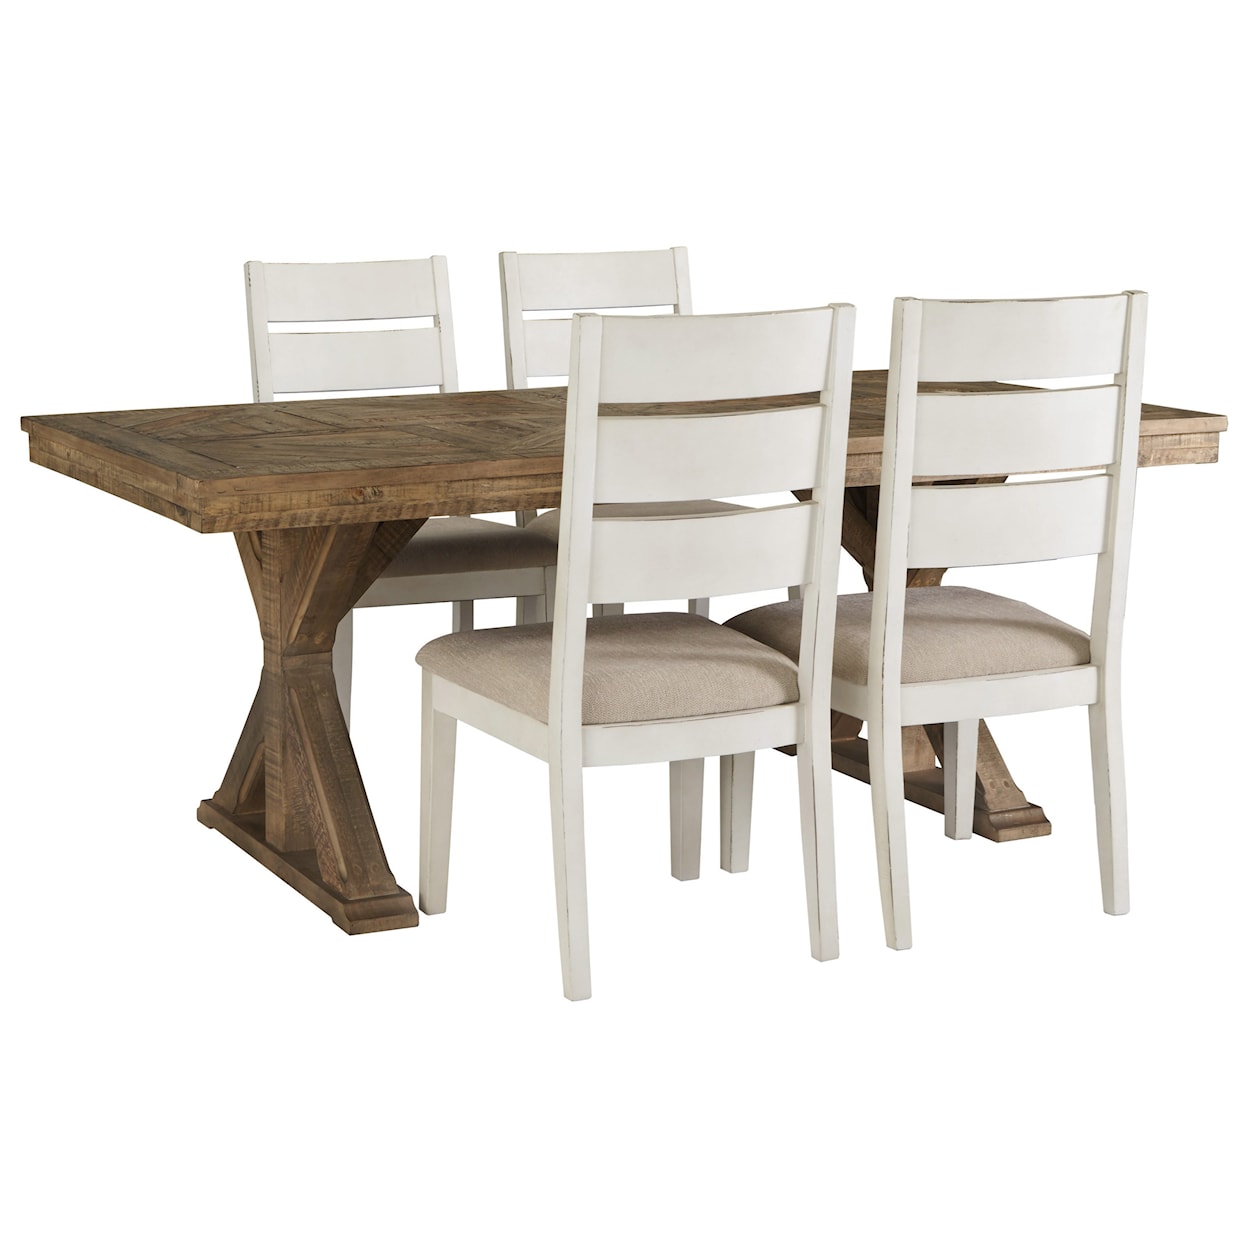 Signature Design by Ashley Grindleburg 5 Piece Rectangular Table and Chair Set